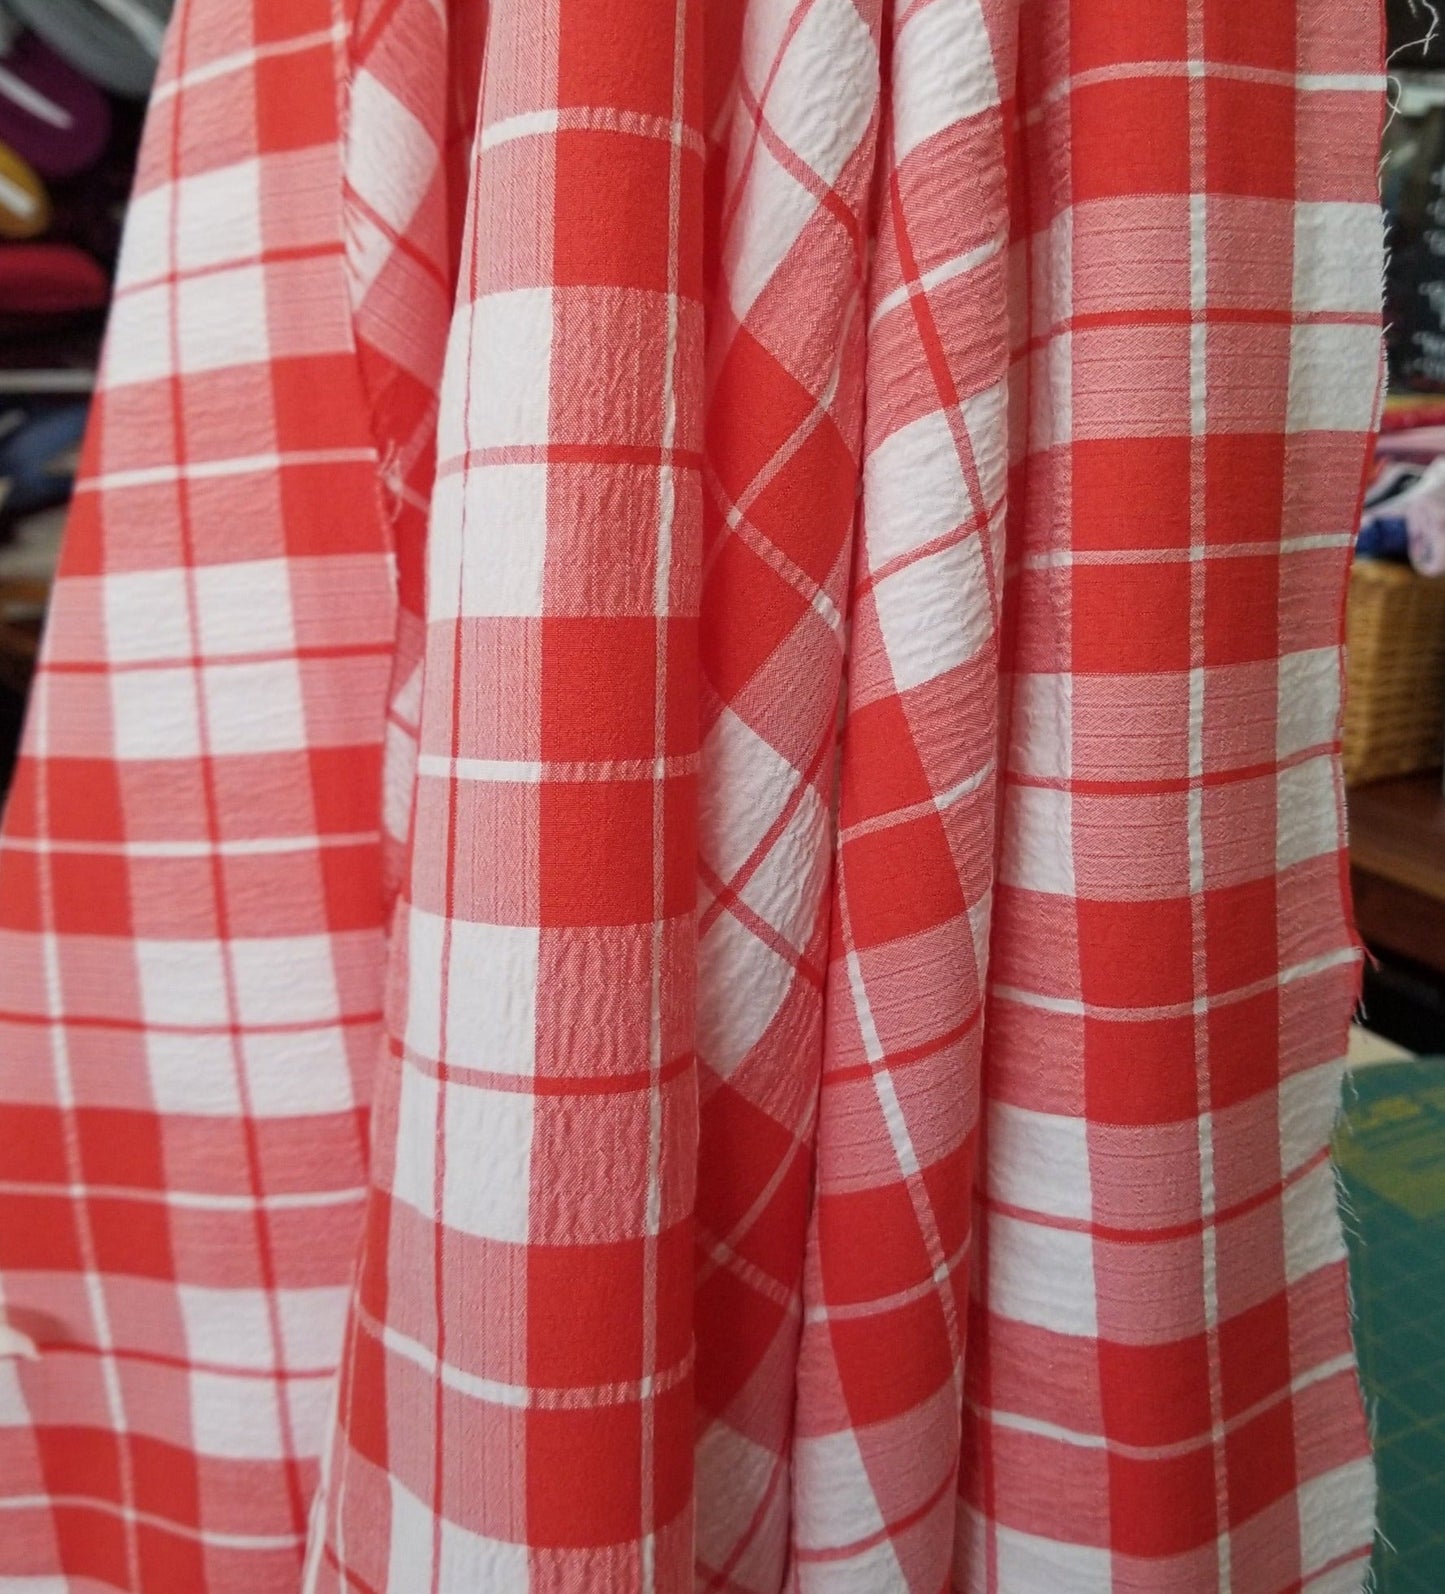 LA Finch 5 yard precuts: 5 yards of Designer Deadstock Apple Red Picnic Gingham White Textured Seersucker Poly Rayon Spandex Woven